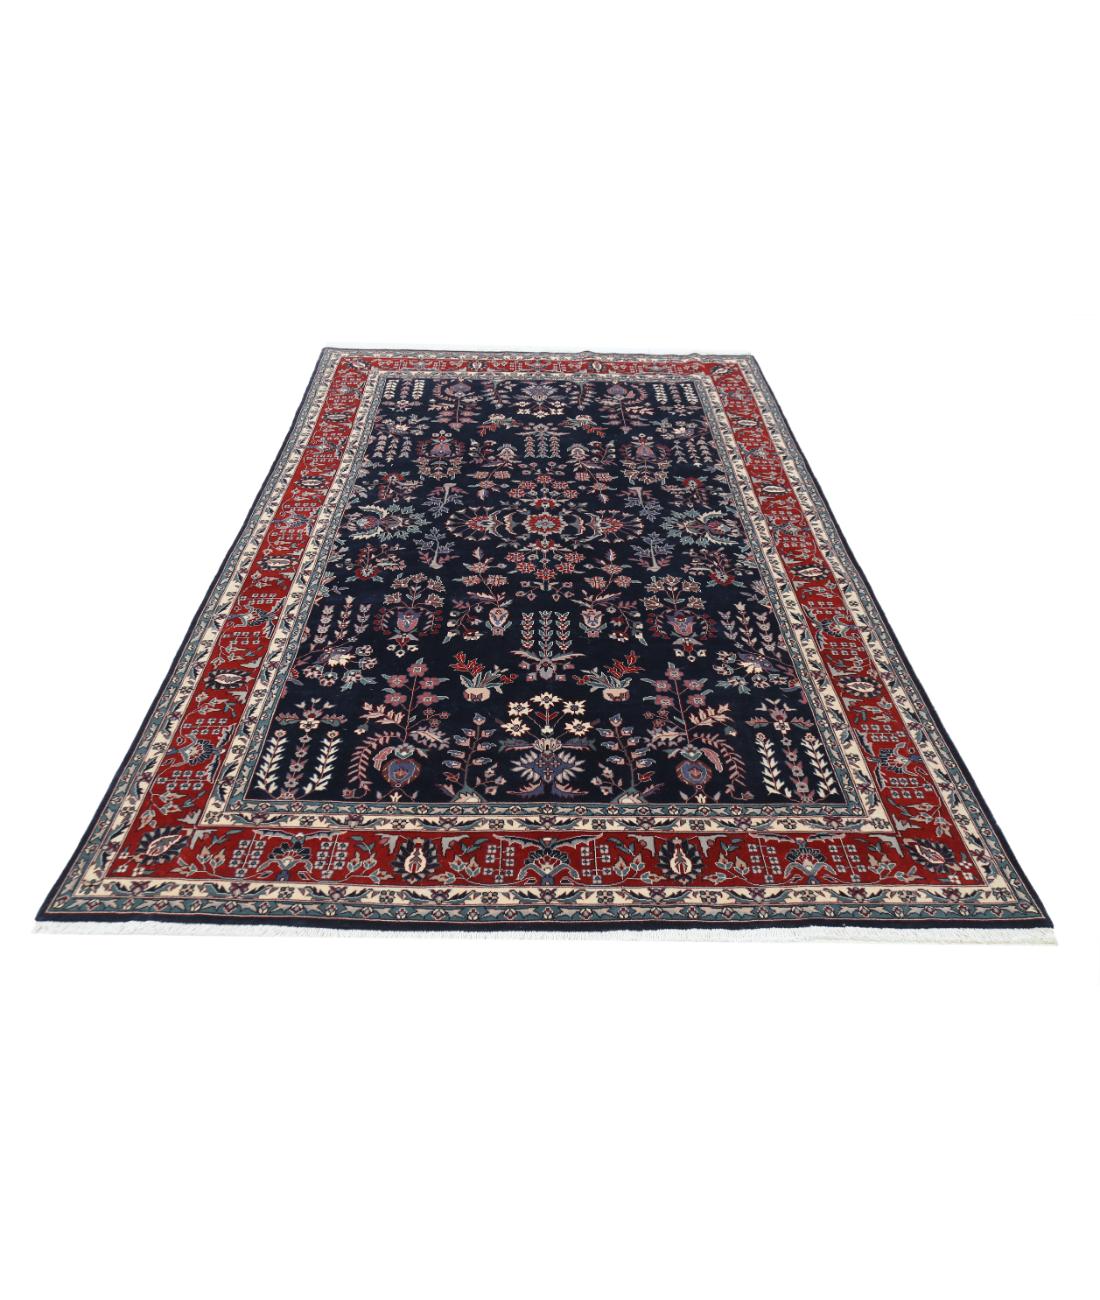 Heritage 6' 0" X 9' 1" Hand-Knotted Wool Rug 6' 0" X 9' 1" (183 X 277) / Blue / Red